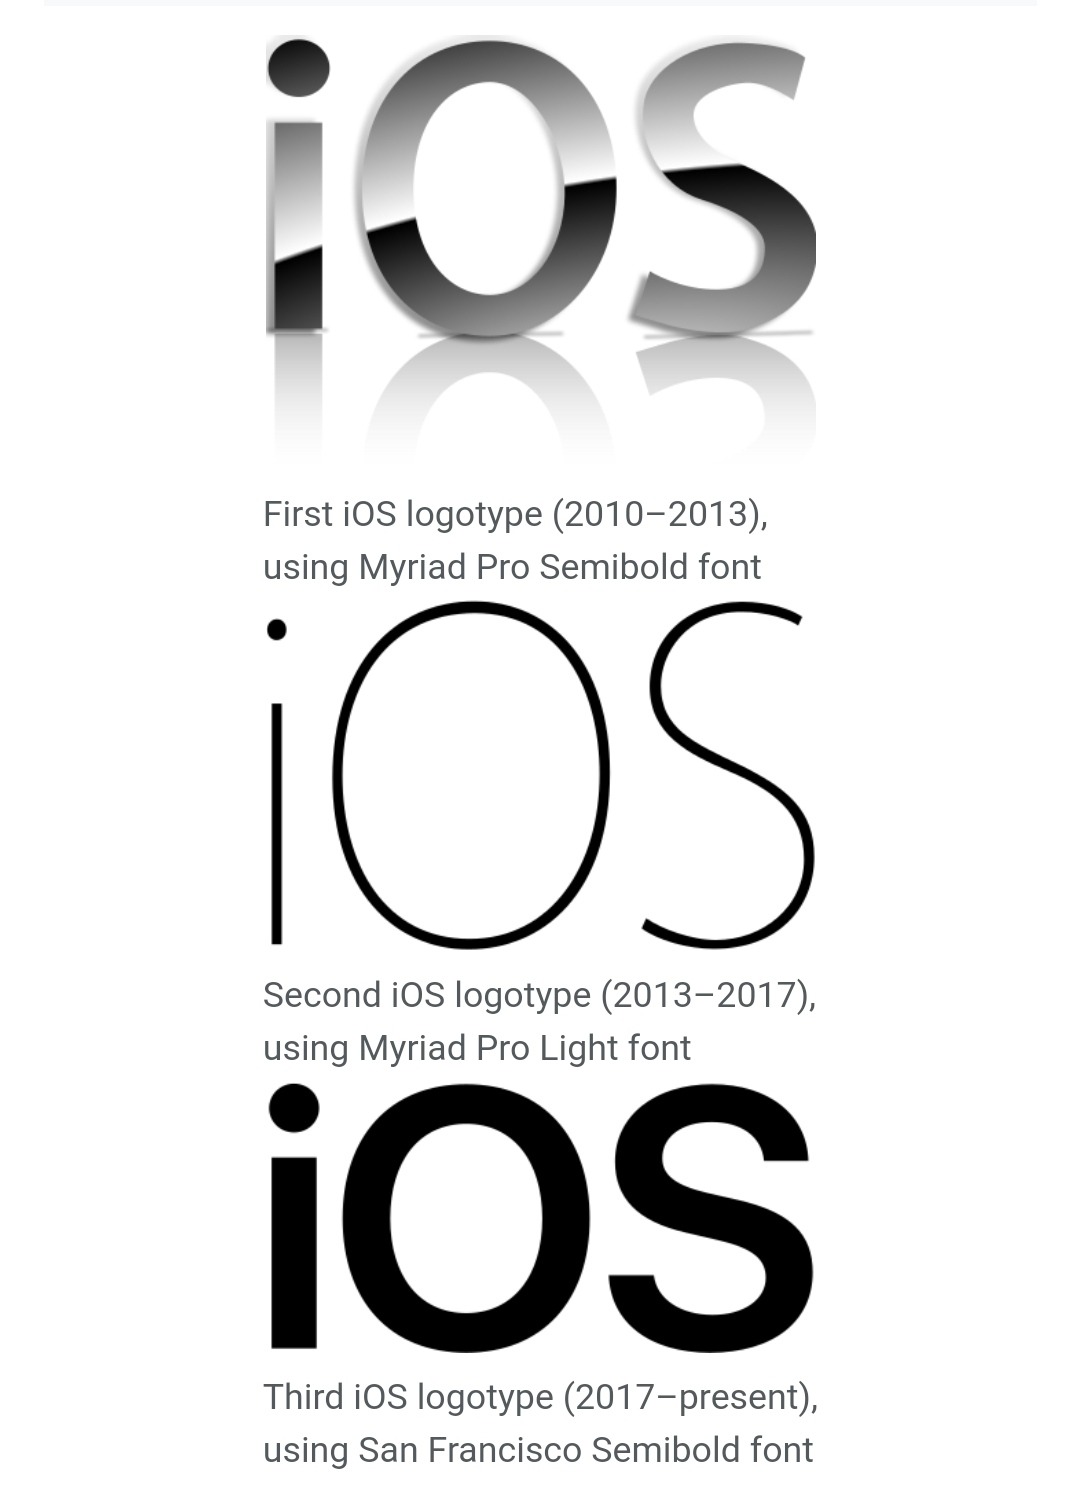 History of iOS versions